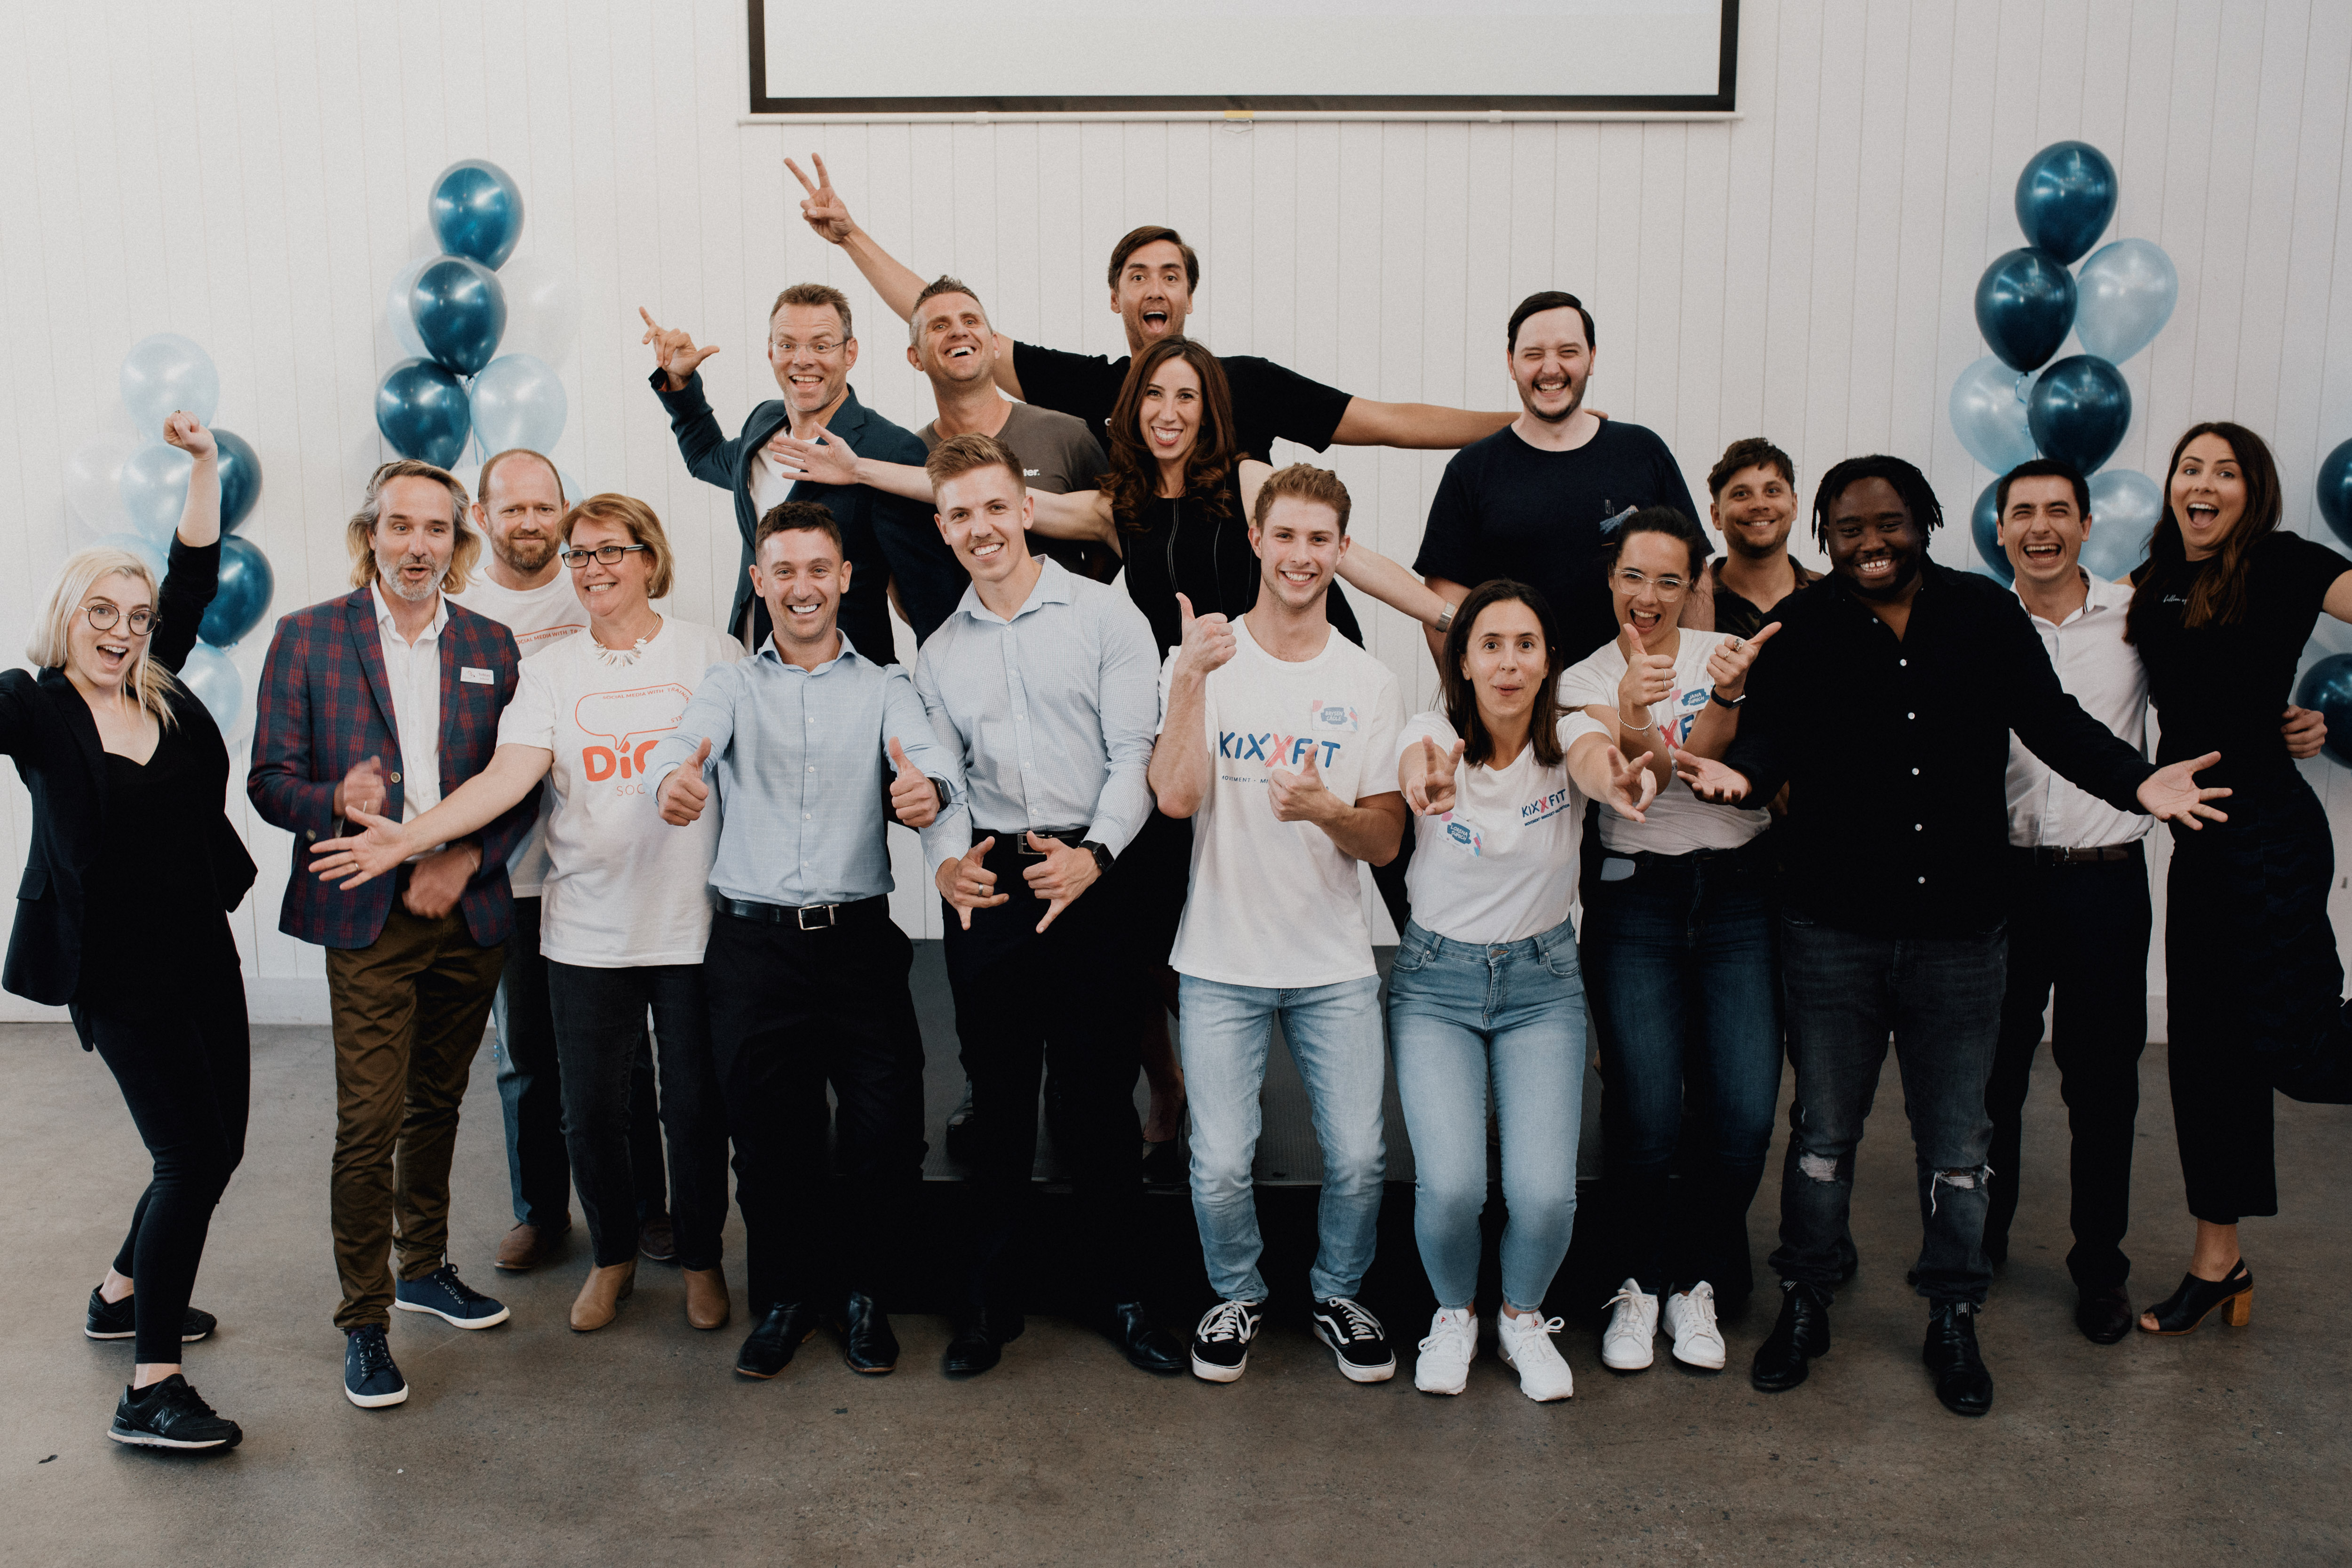 Plus Eight accelerator program sees another year of success in 2020